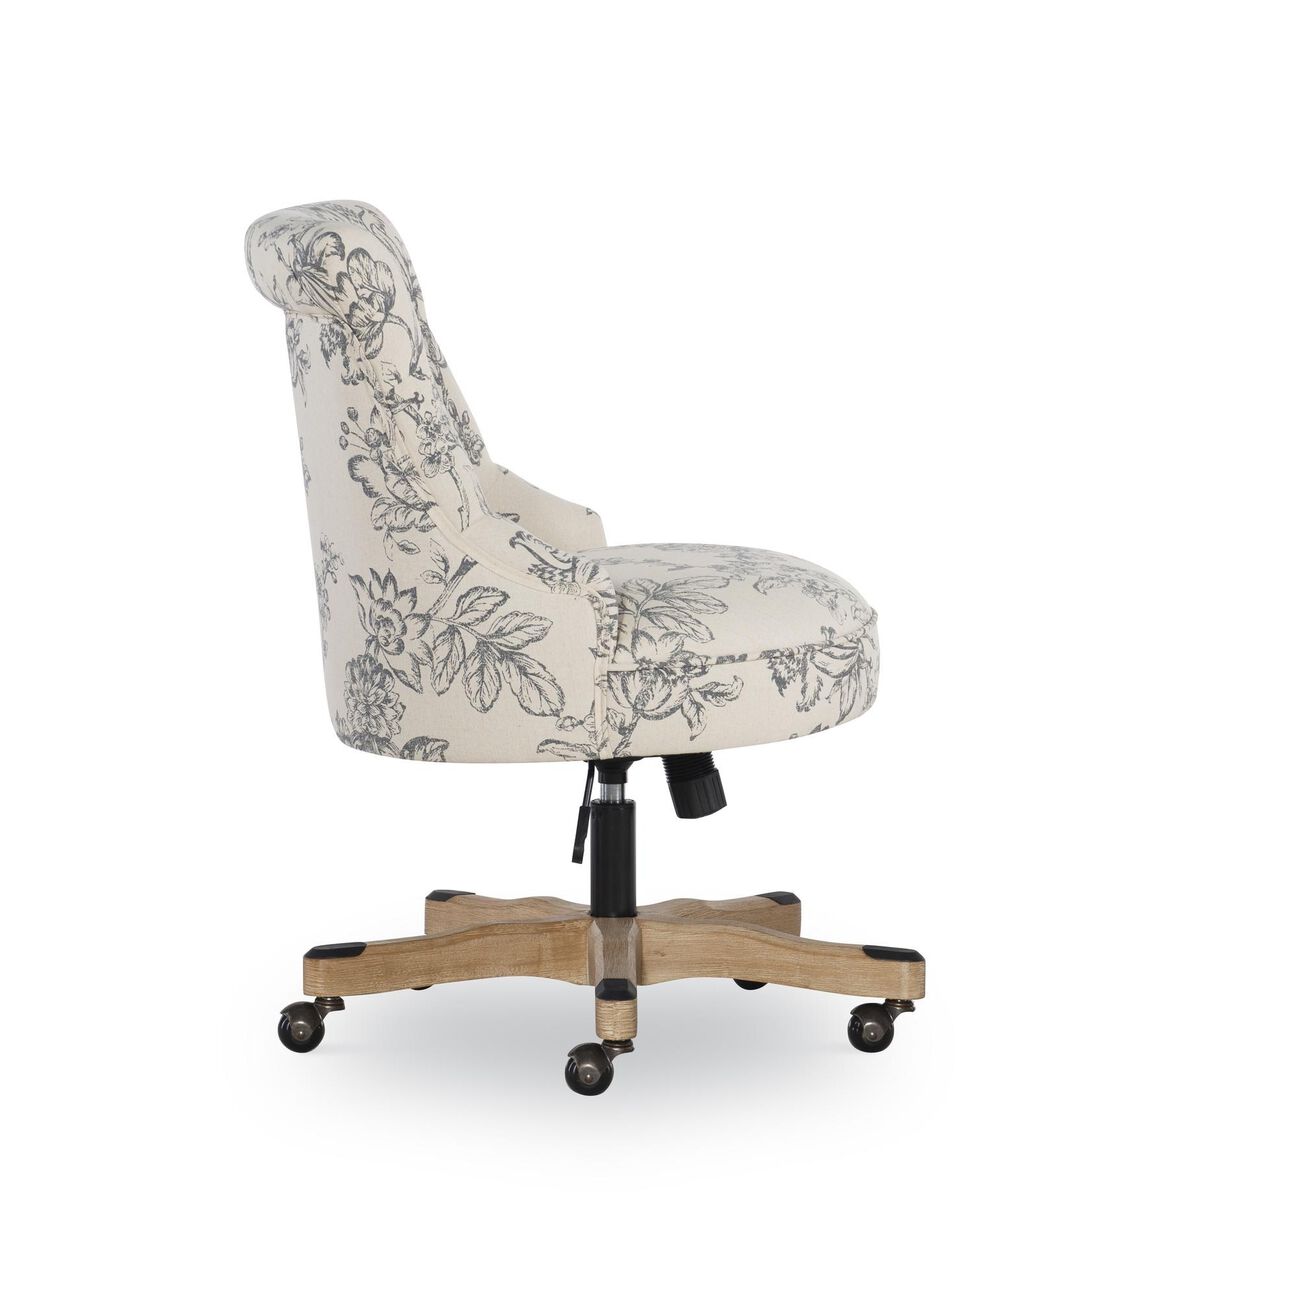 Floral Fabric Upholstered Office Chair with Adjustable Height, White and Gray